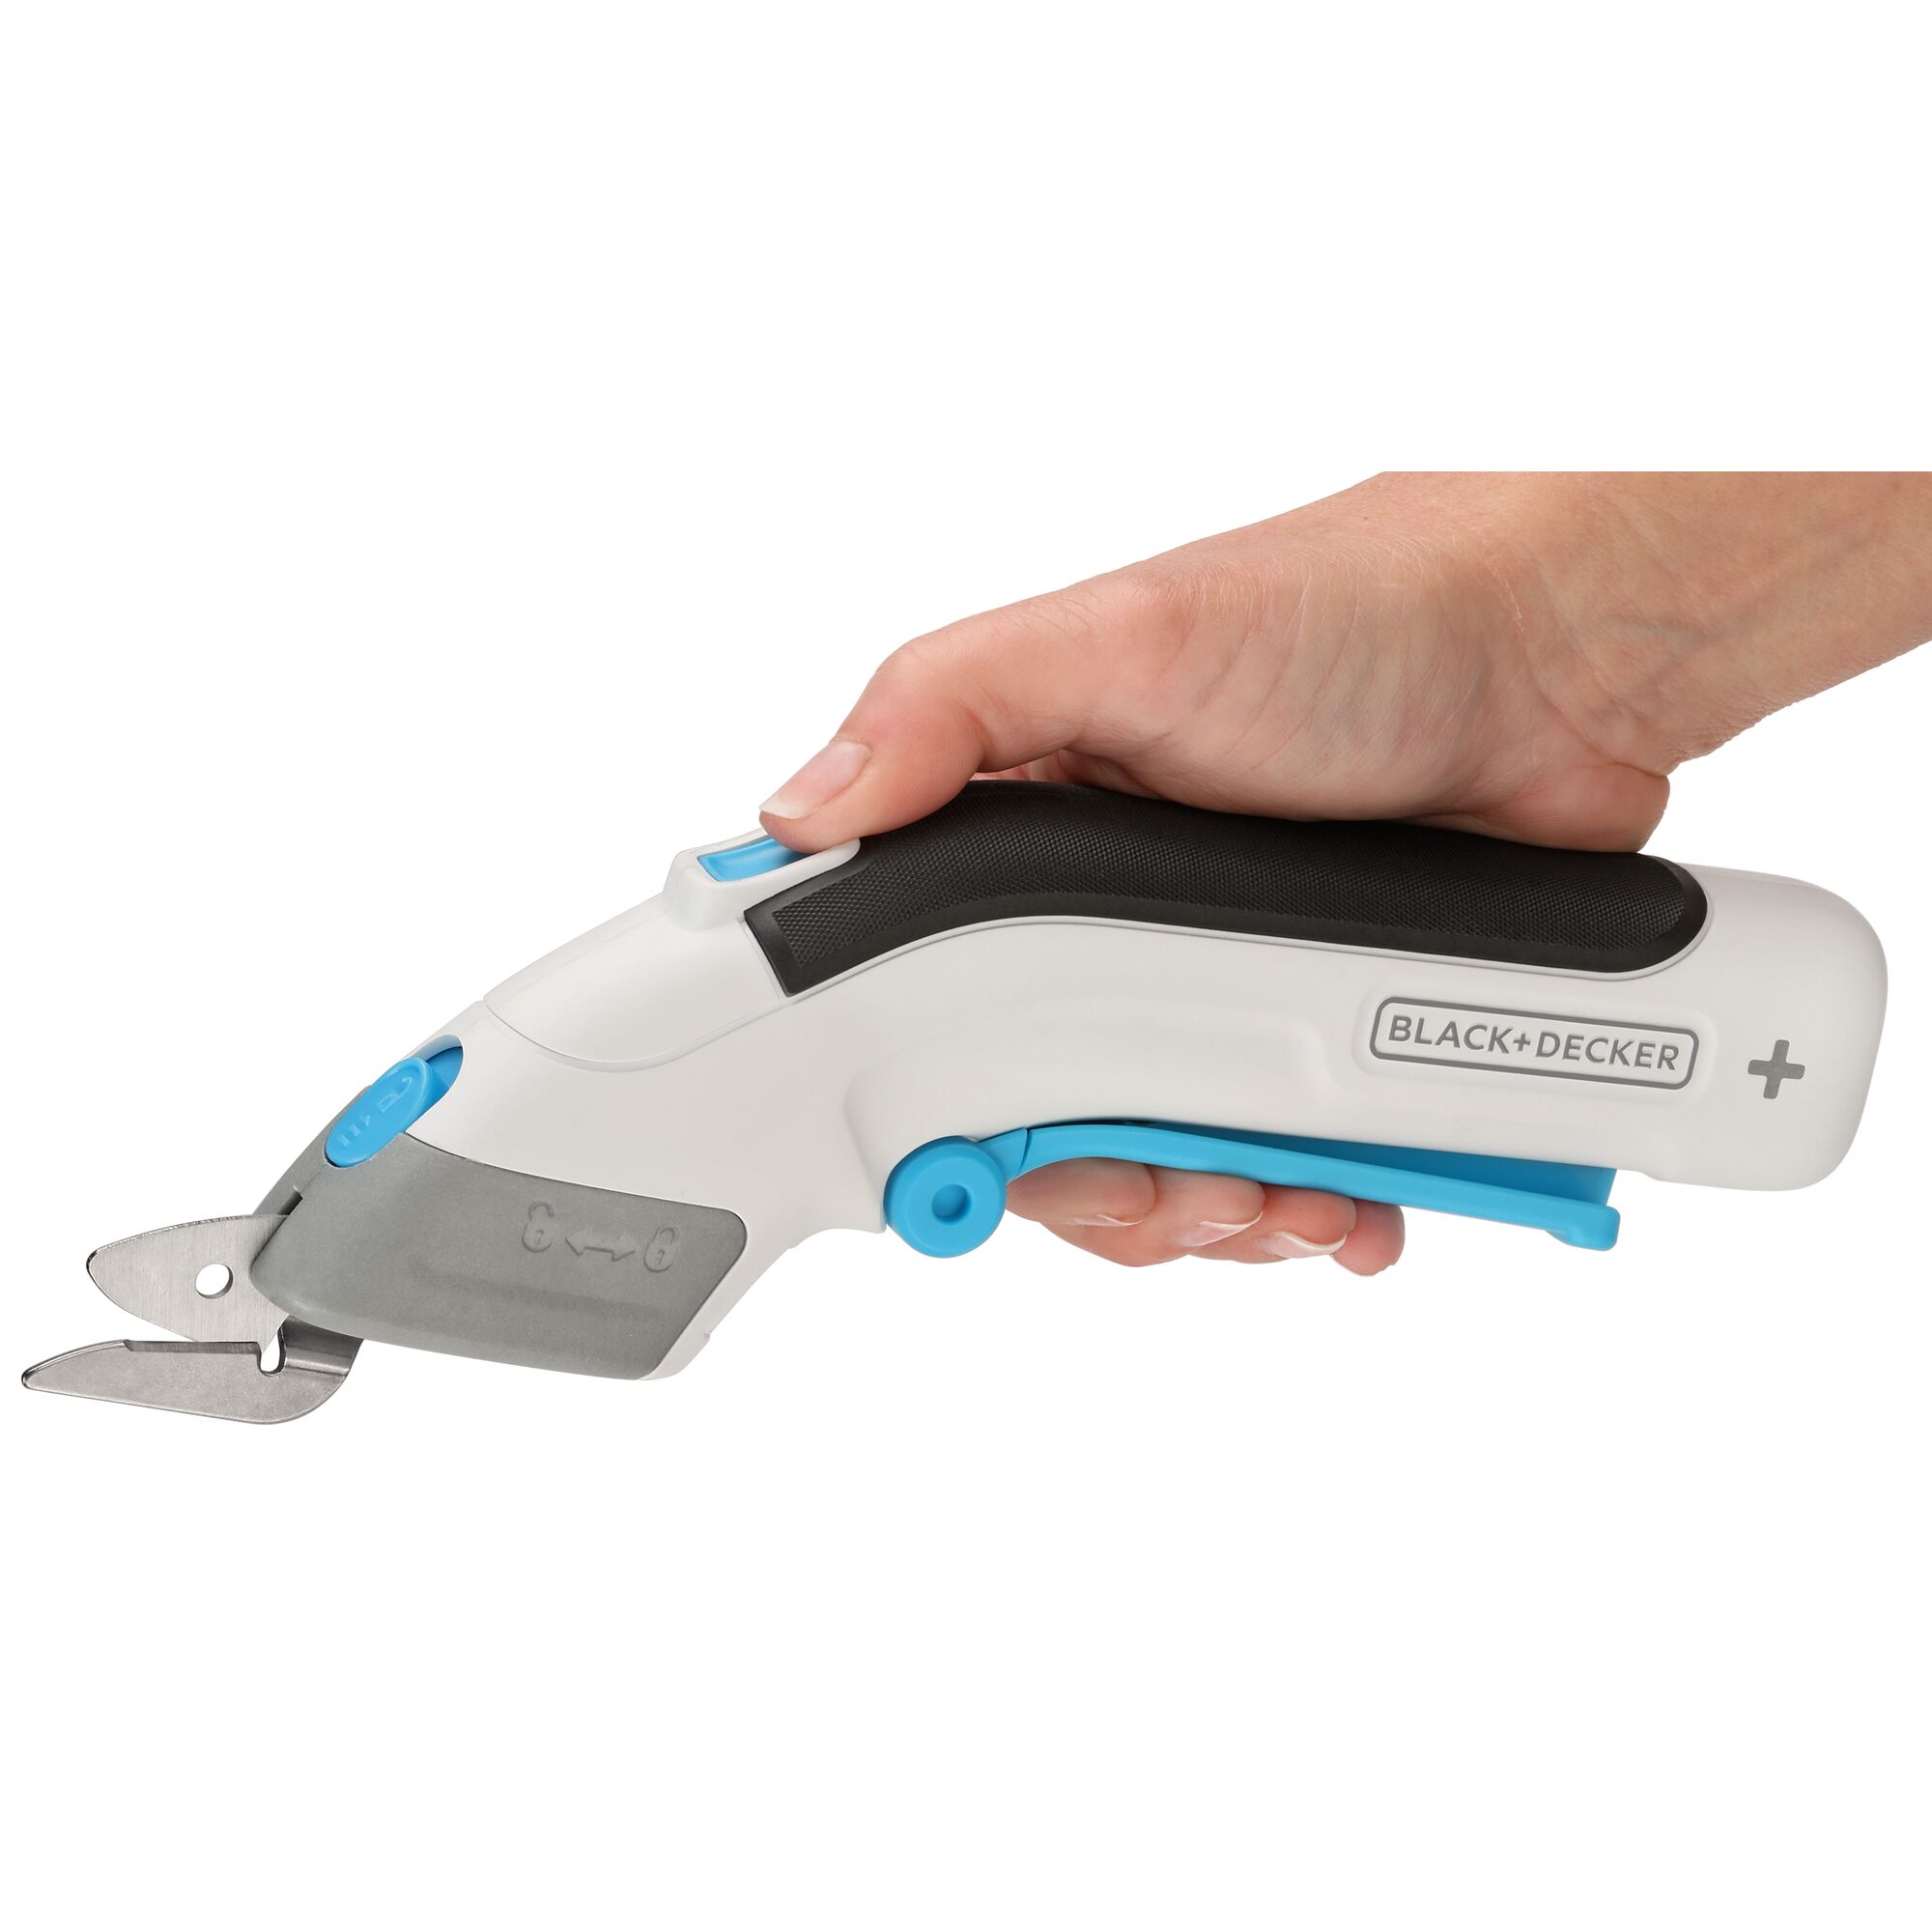 woman holding BLACK+DECKER cordless power scissors with finger on safety lock